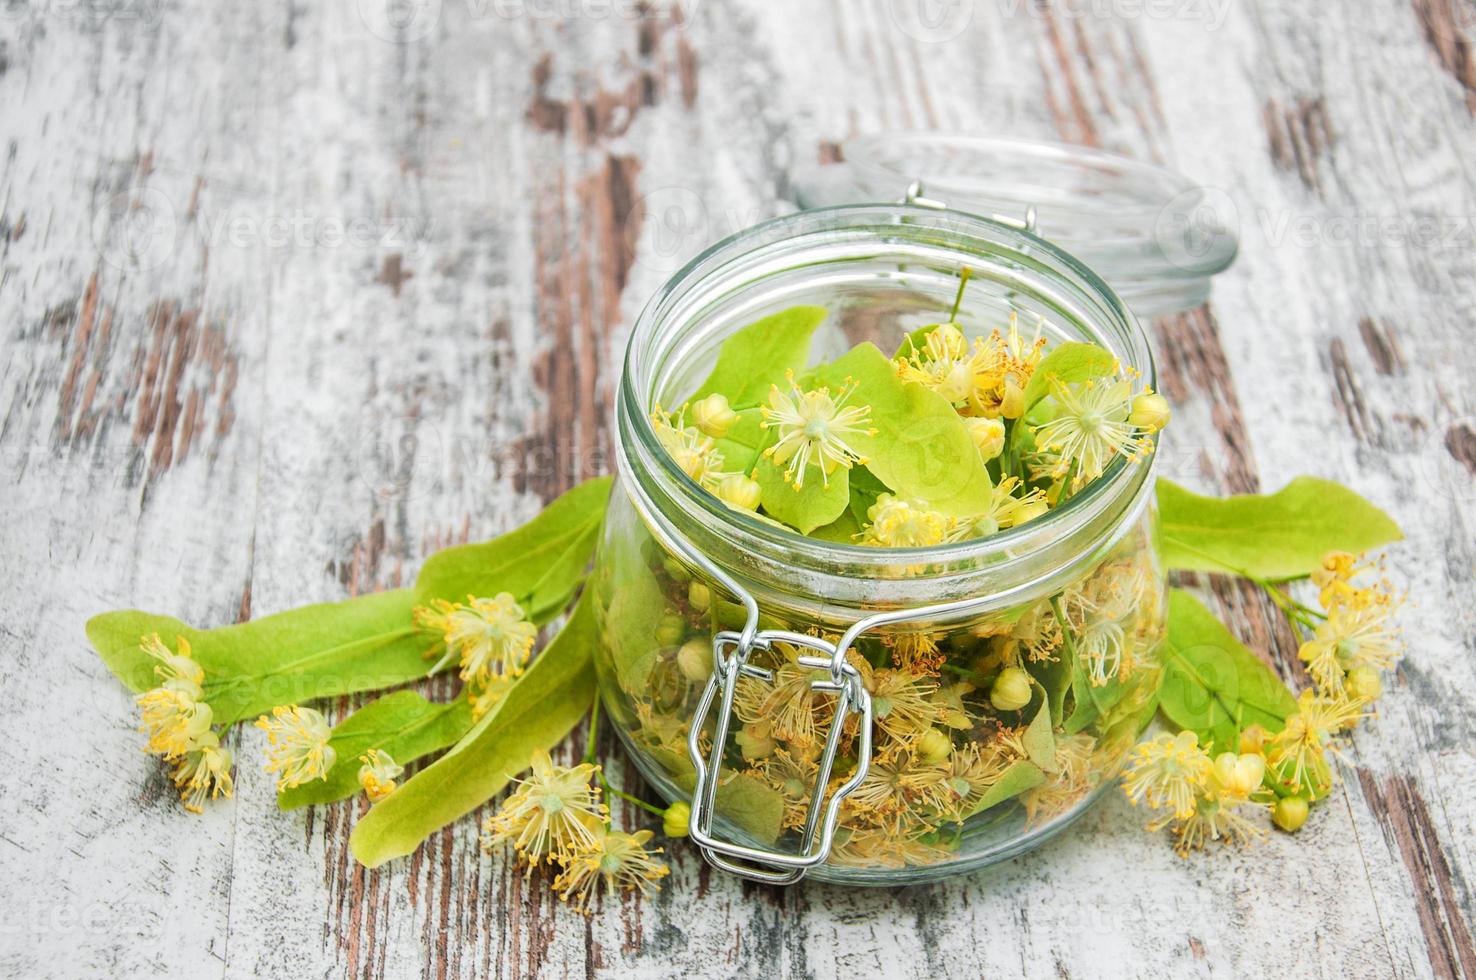 Jar with linden flowers photo